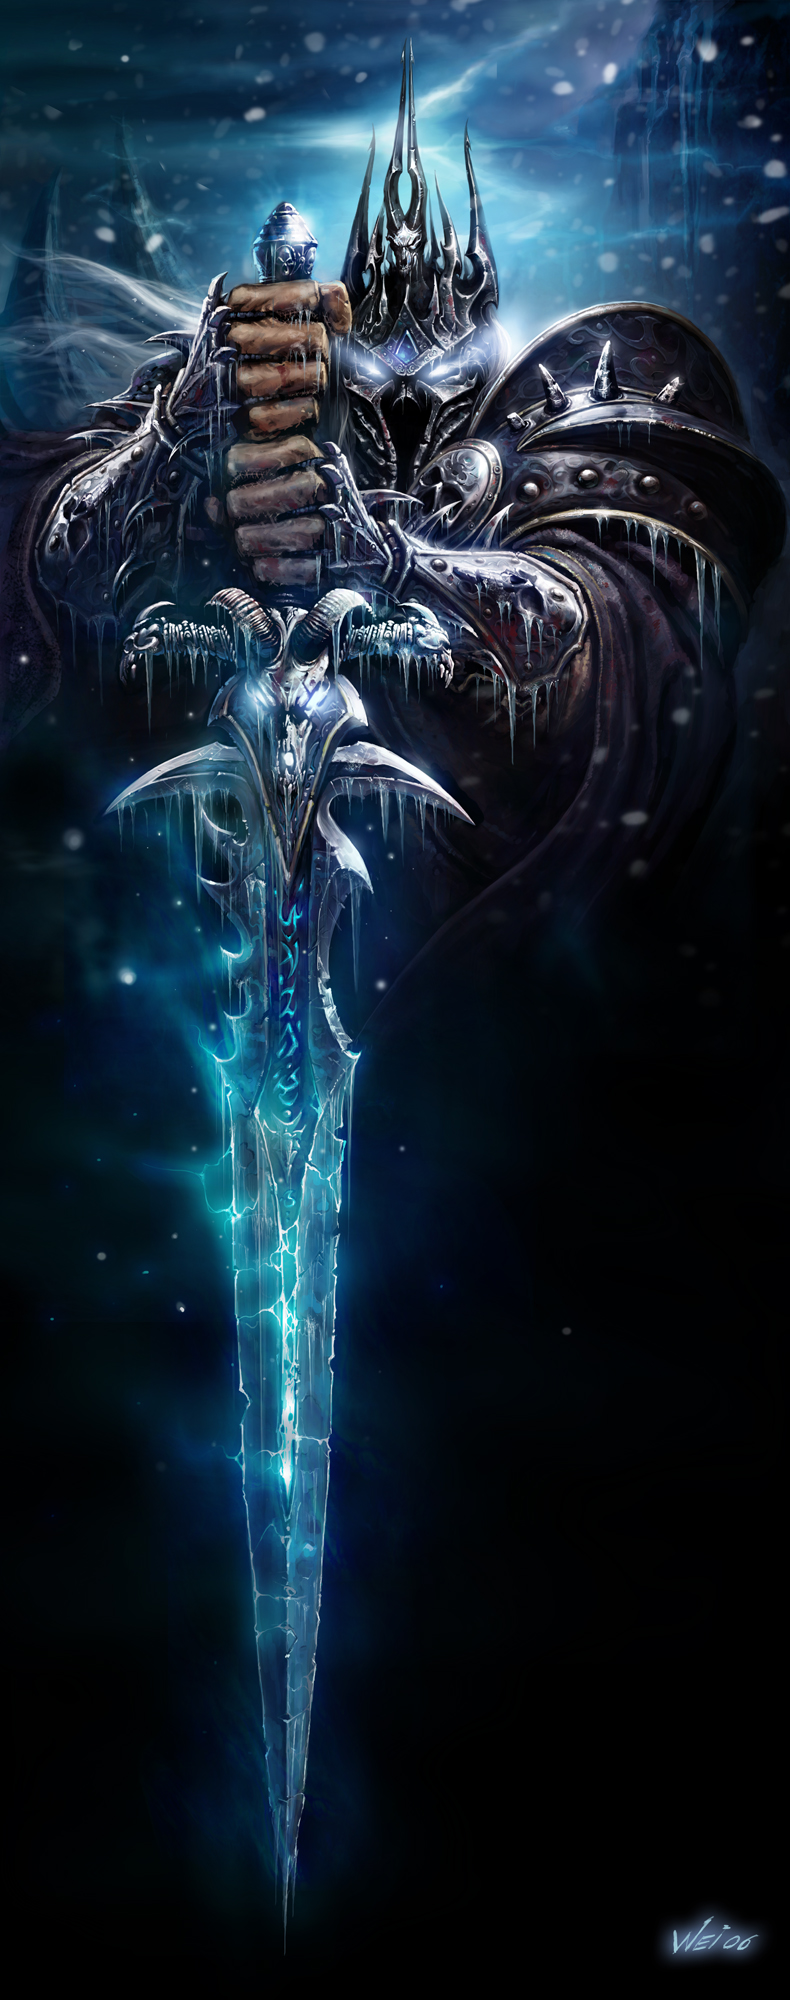    World of Warcraft: Wrath of the Lich King